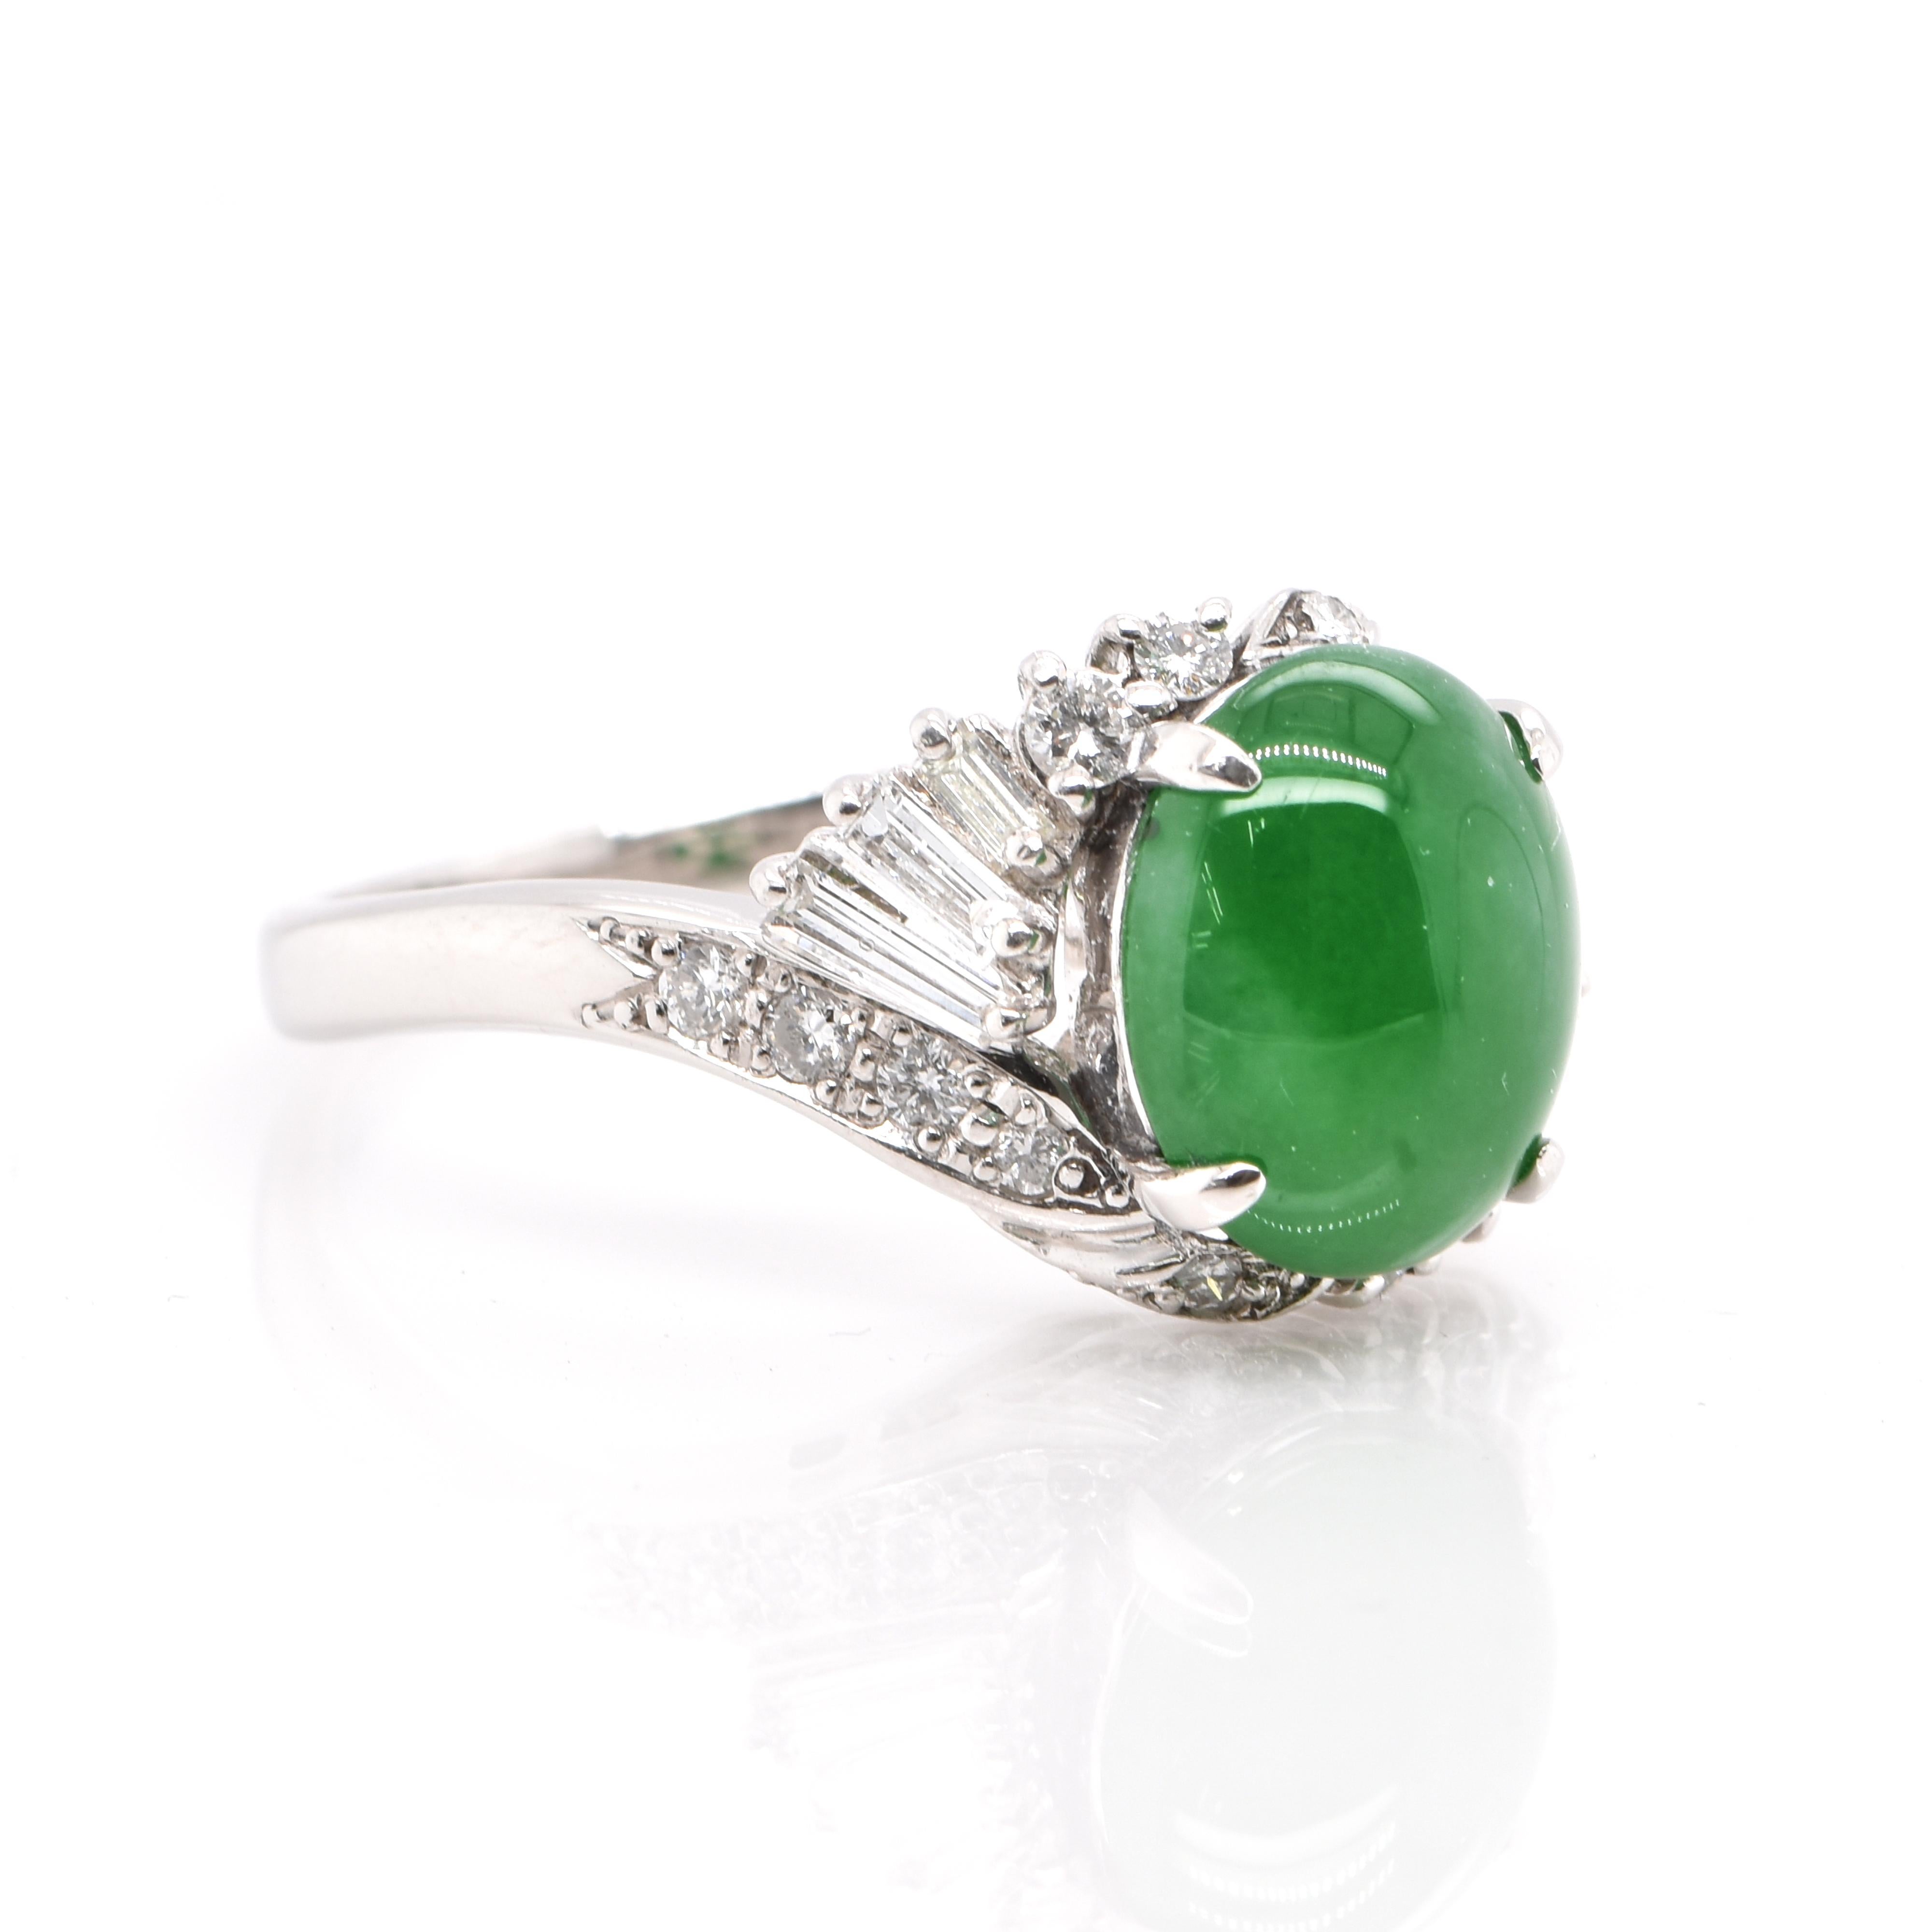 A beautiful Ring featuring a 3.76 Carat, Natural Jadeite and 0.51 Carats of Diamond Accents set in Platinum. Jadeite has been cherished for millennia. Its nature is pure and enduring, yet sensuous and luxurious. Jadeite’s exceptional look and feel,